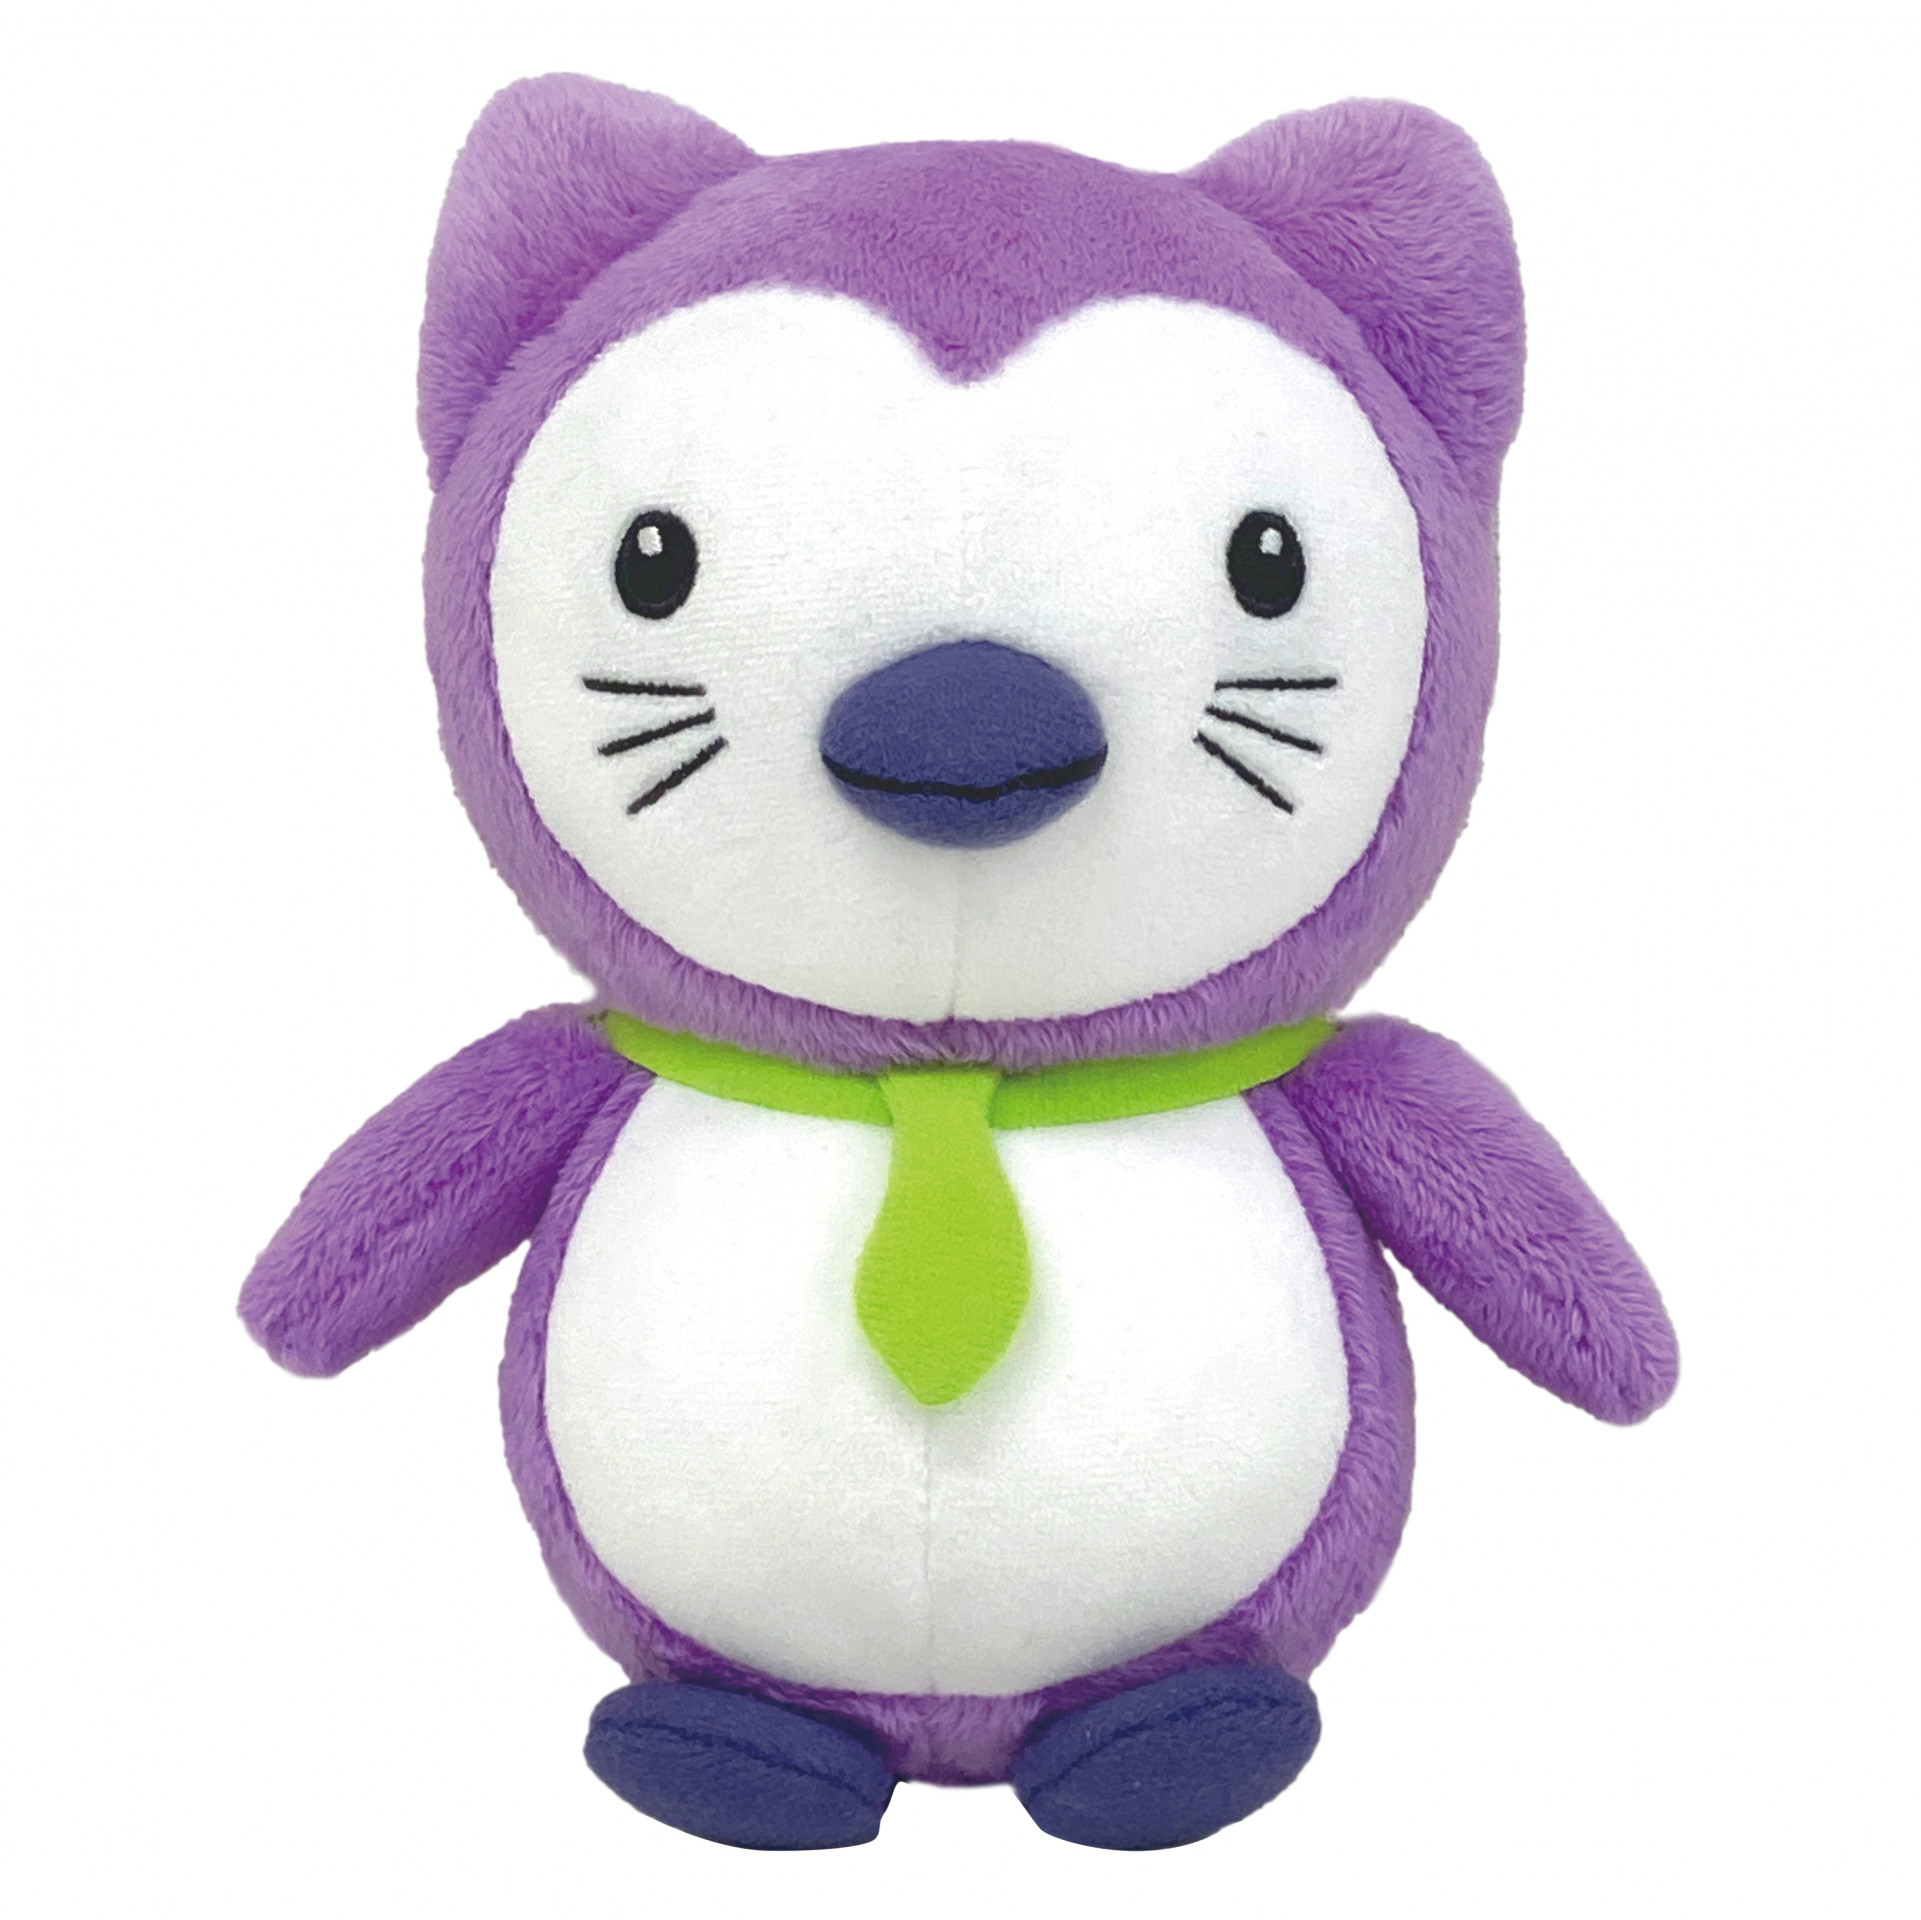 Get a Cute New Plush from the 